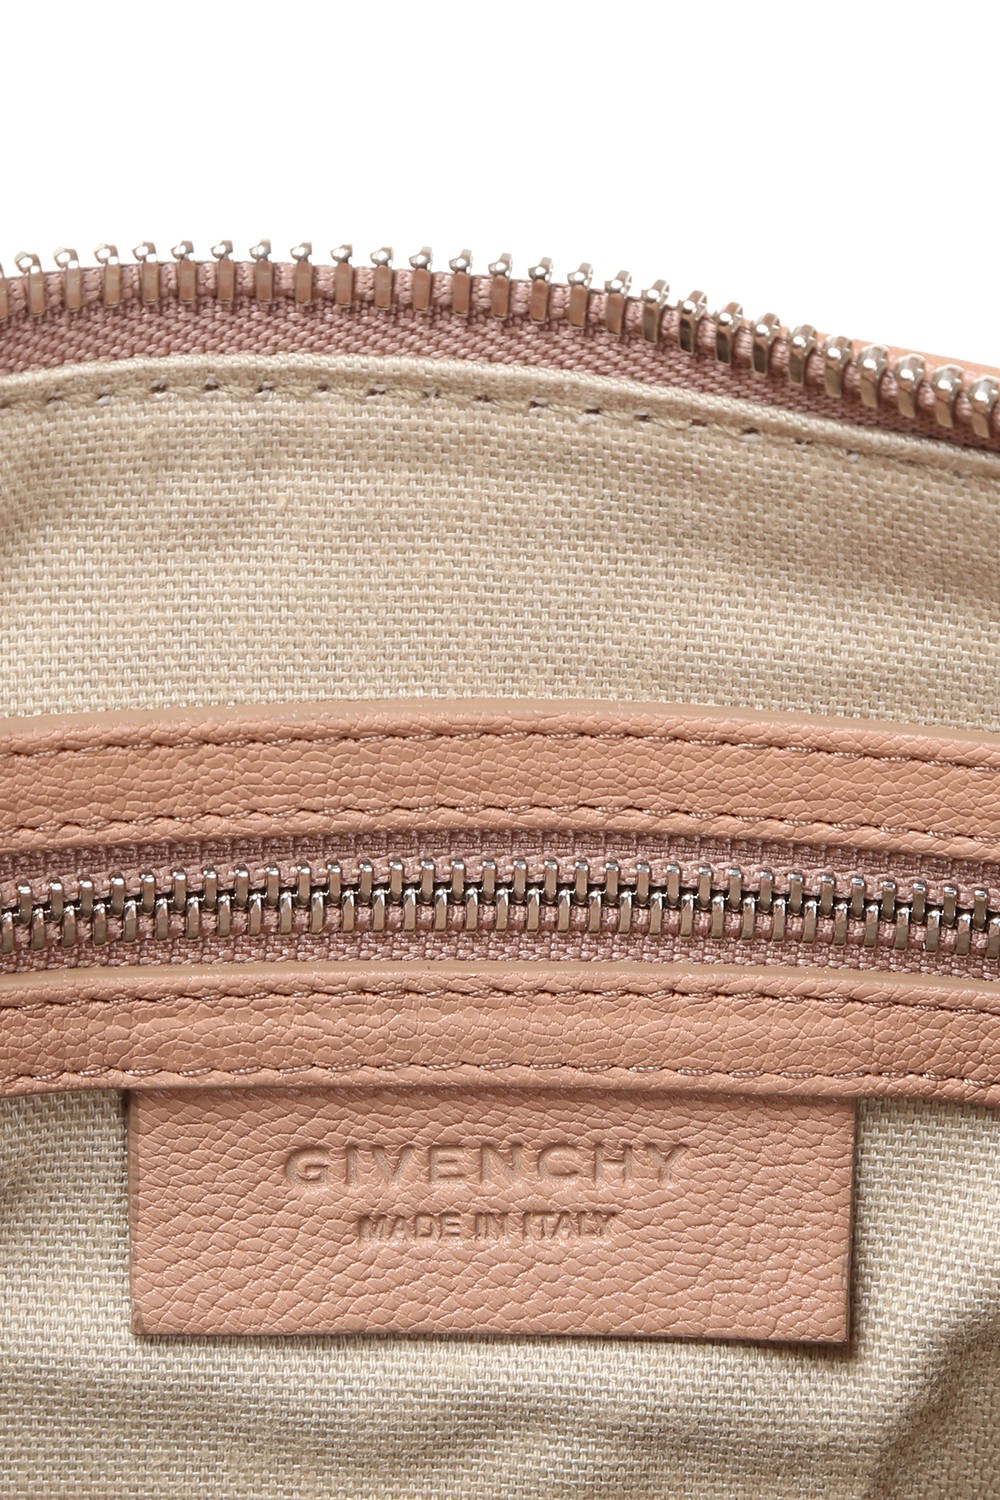 Givenchy 'givenchy pink covers